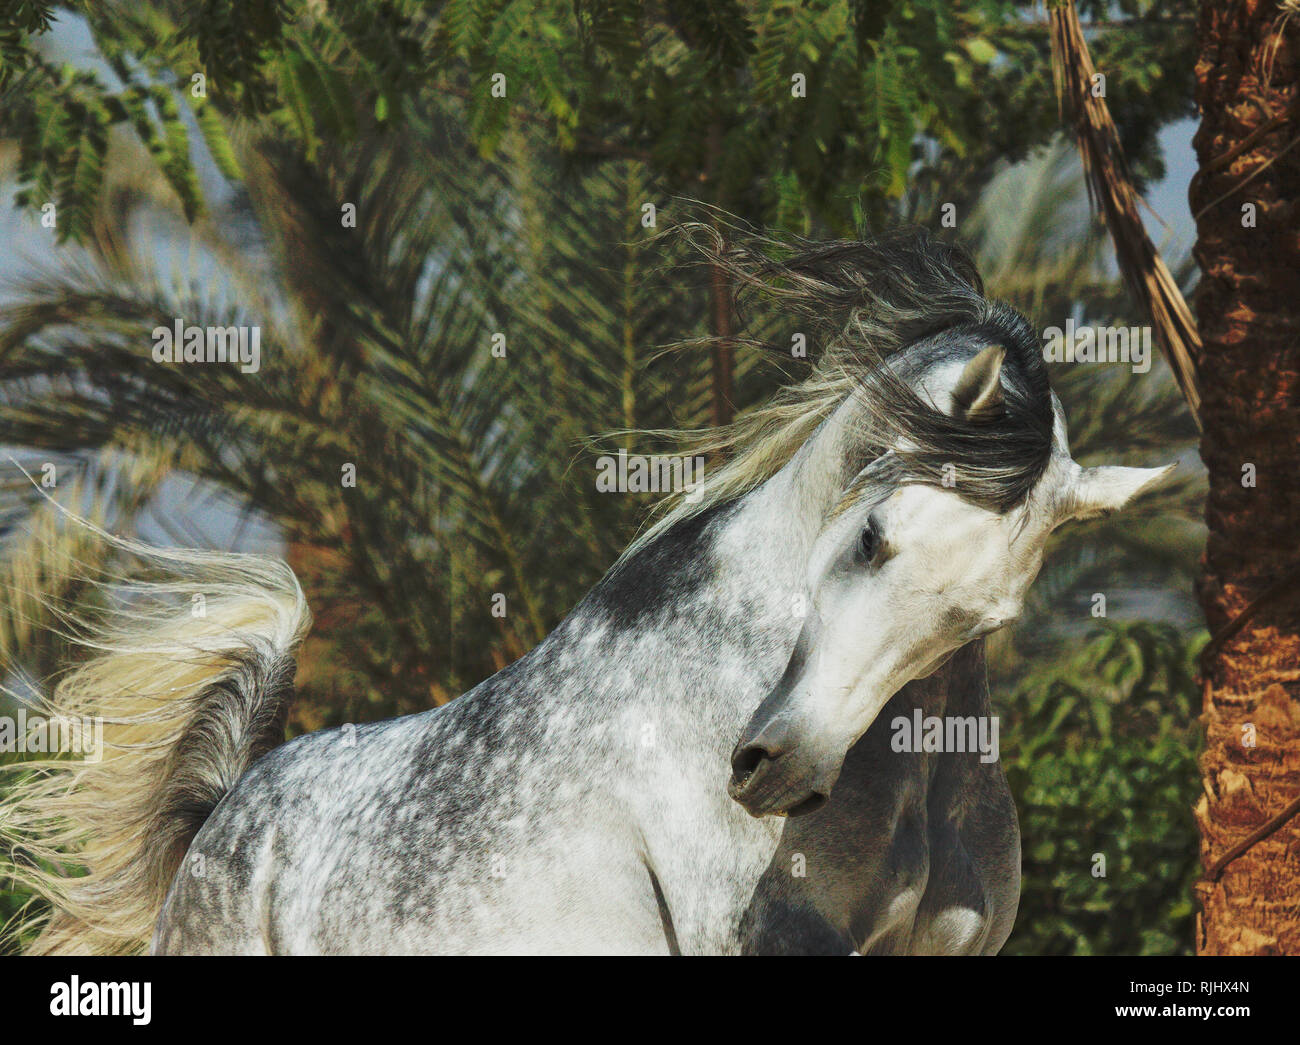 Dappled grey arabian stallion playing with palm trees on the background. Horizontal, front view, in motion, portrait. Stock Photo